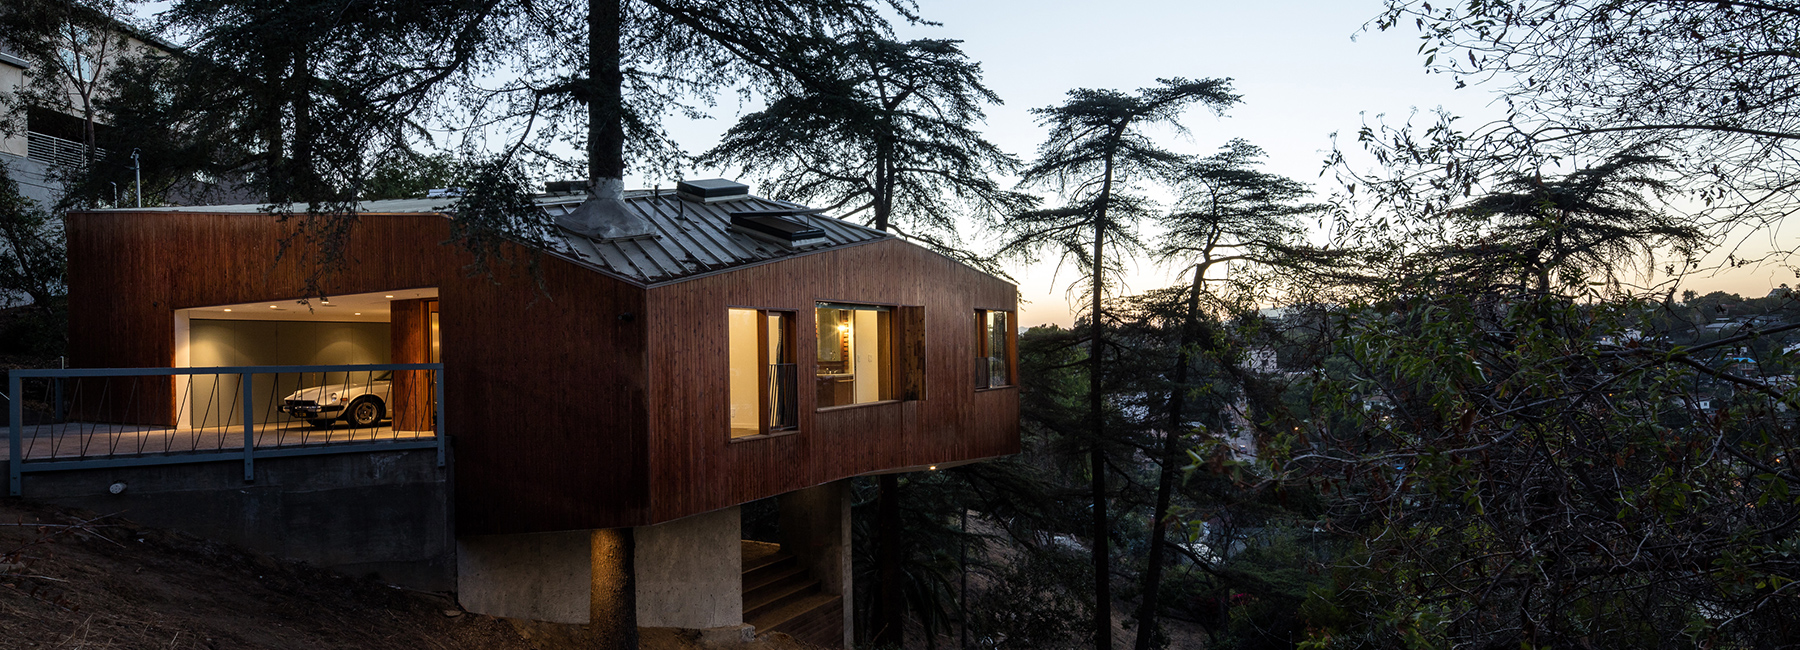 cantilevered dwelling by anonymous architects exists amid the trees in los angeles